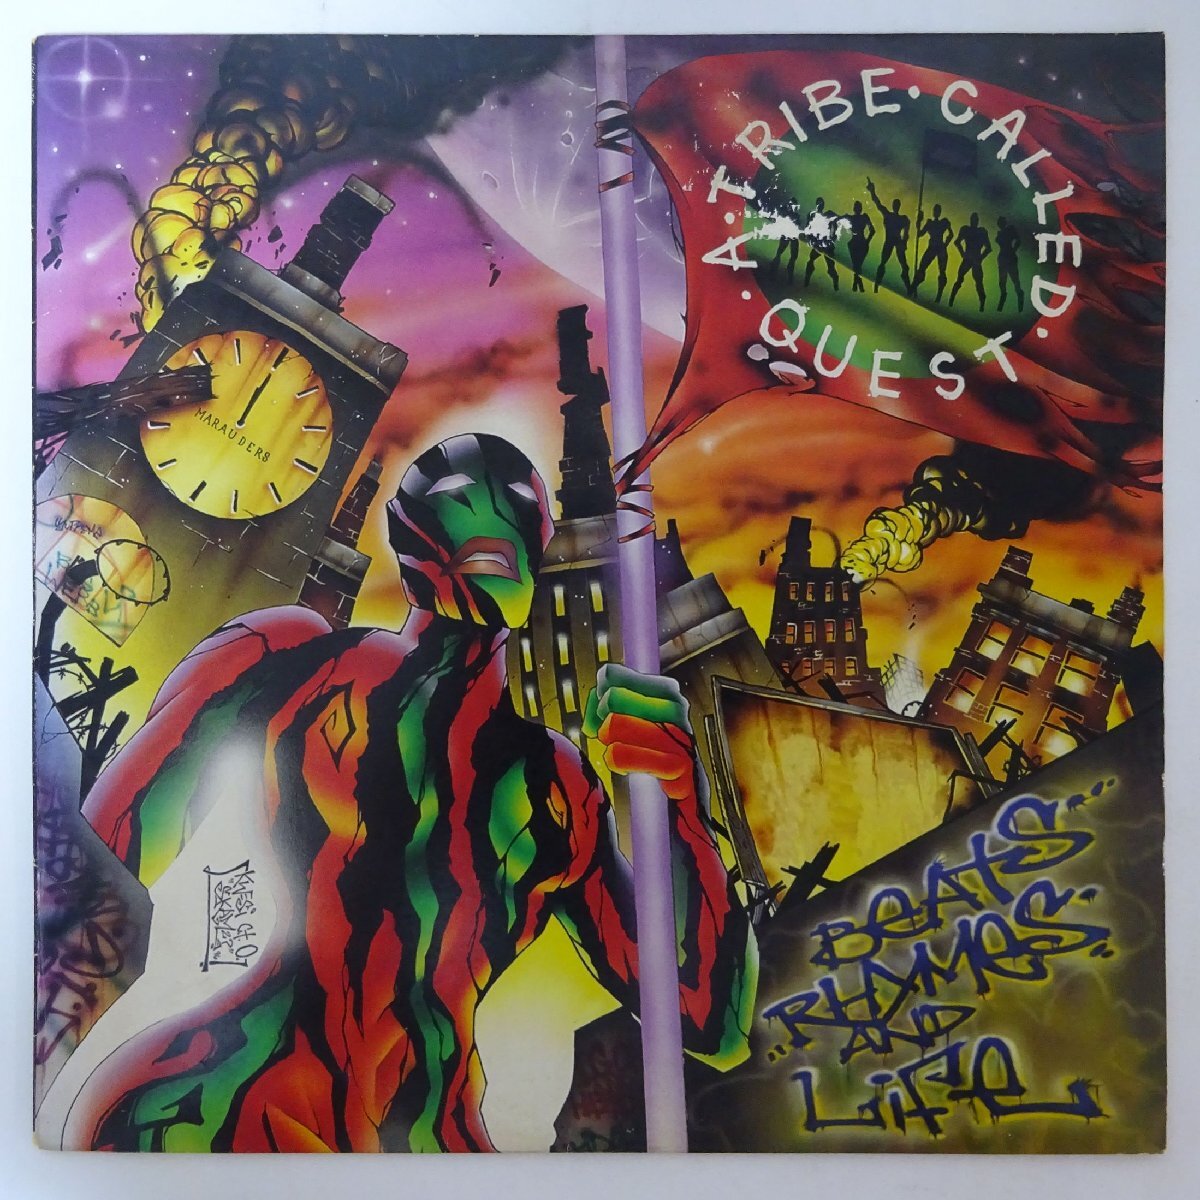 14031677;【USオリジナル/2LP】A Tribe Called Quest (Q-Tip, Phife Dawg, Ali Shaheed Muhammad) / Beats, Rhymes And Life_画像1